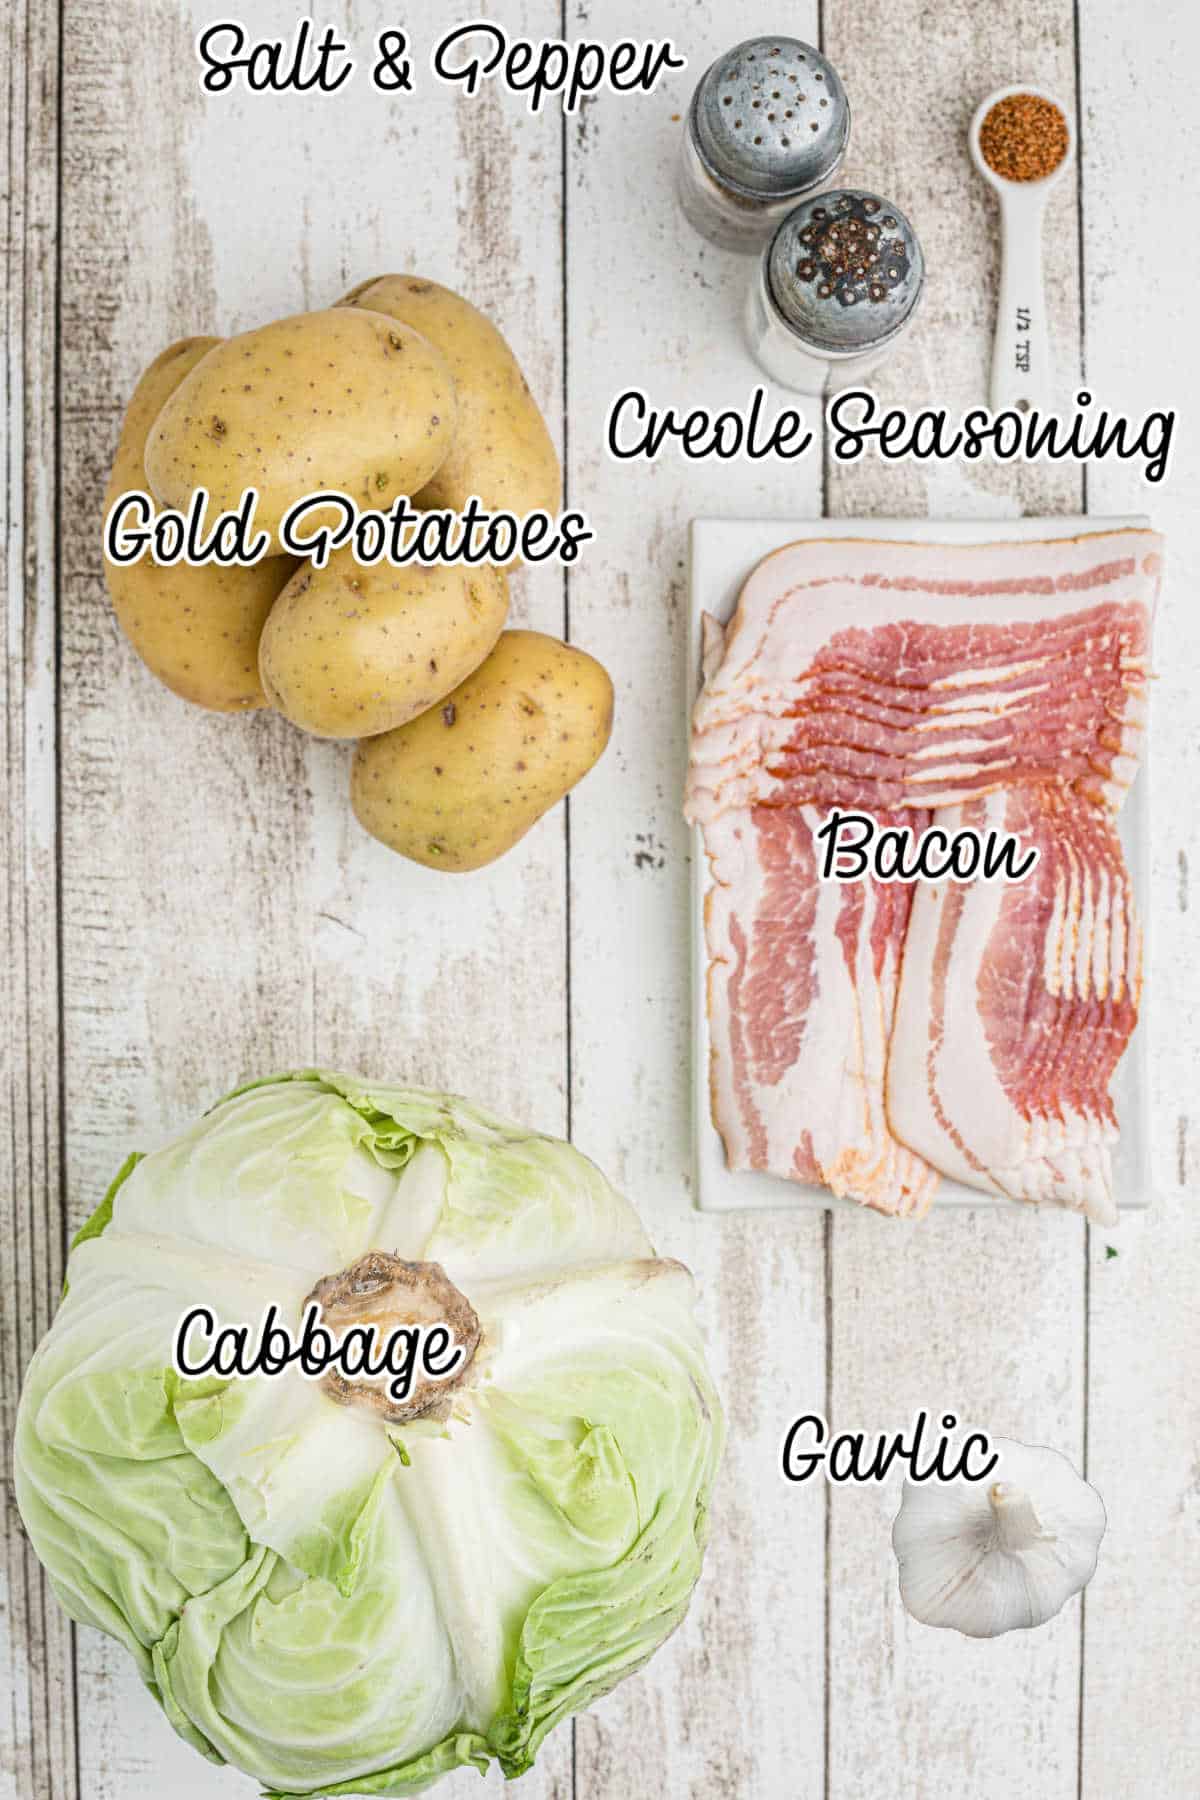 Ingredients needed to make Fried Cabbage and potatoes.